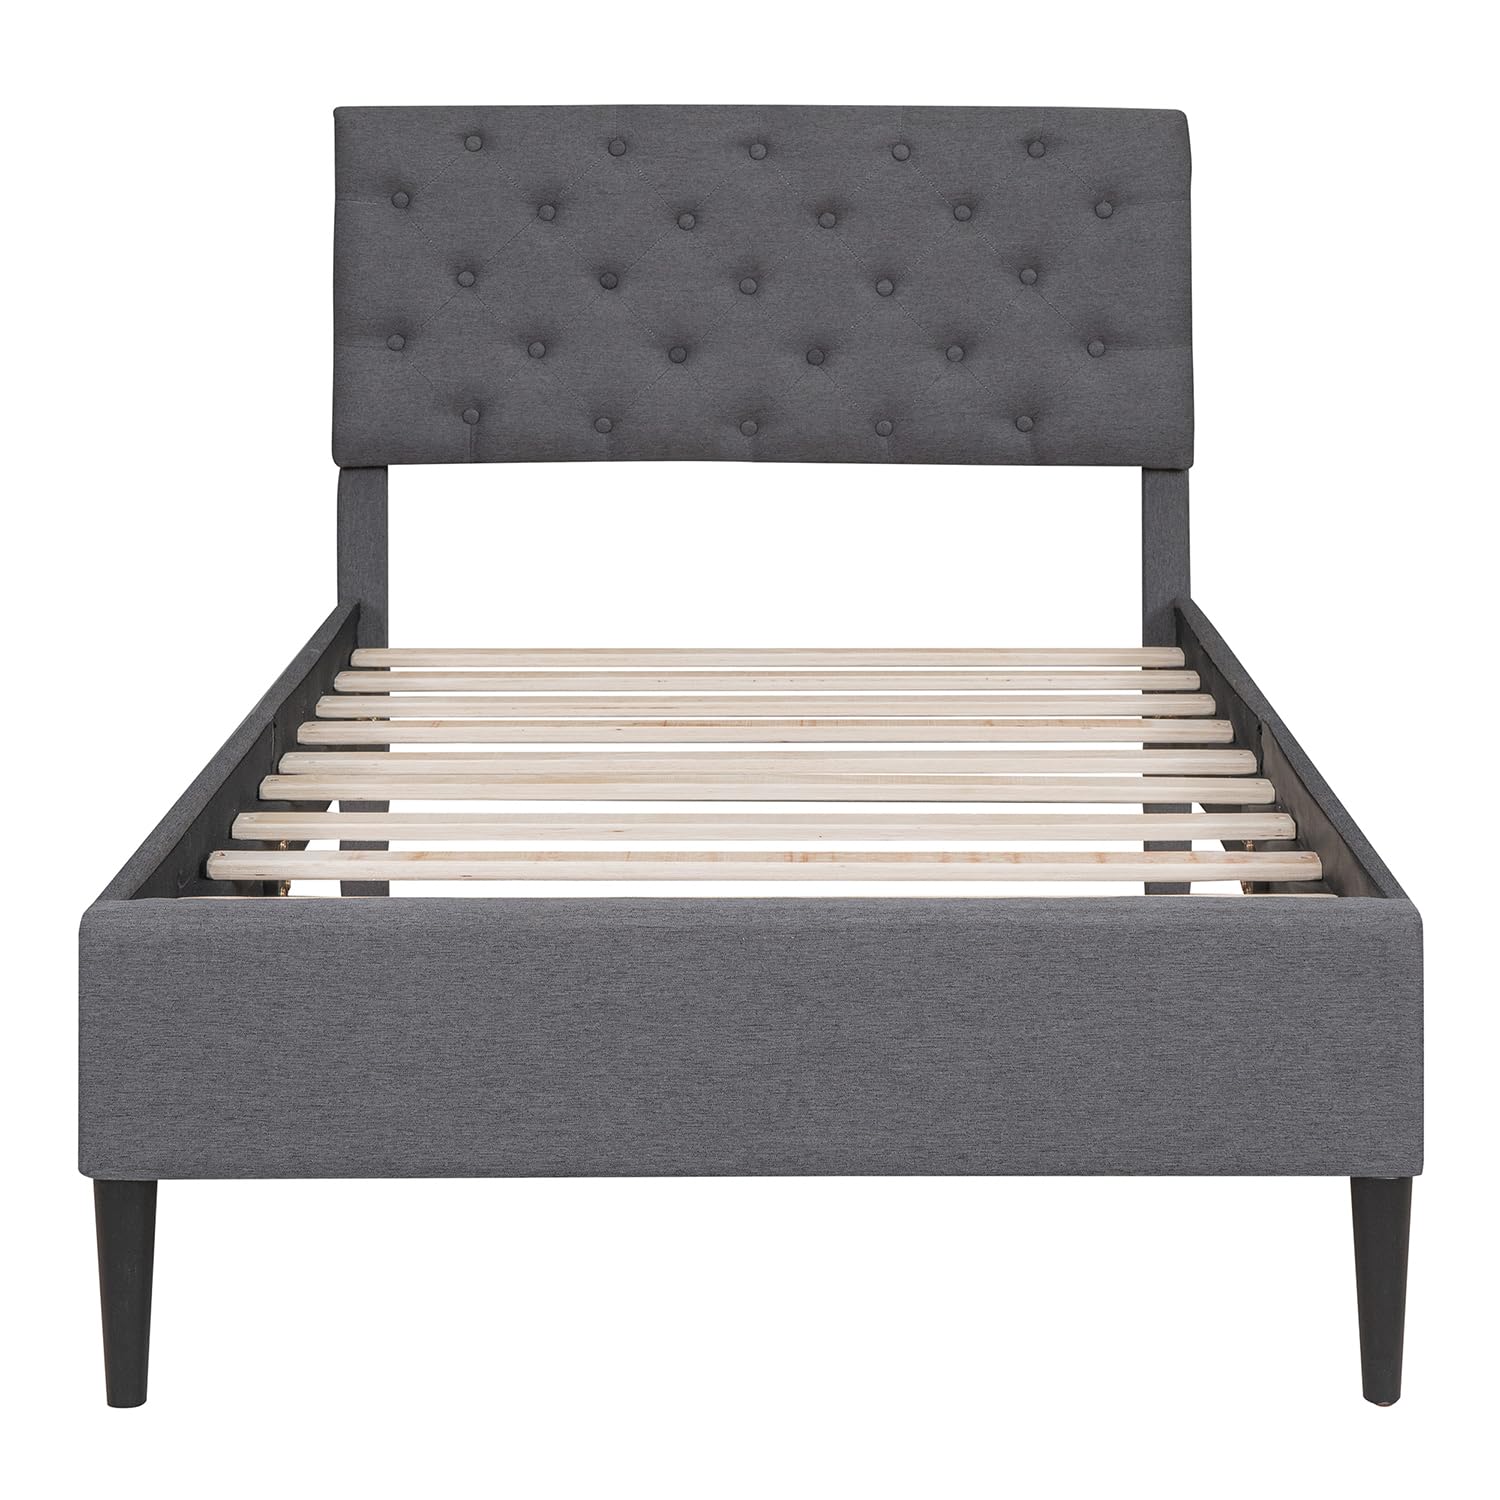 Twin Size Platform Bed, Metal and Wood Bed Frame with Headboard and Footboard, Metal Slat Support/No Box Spring Needed/Easy Assembly (Grey)